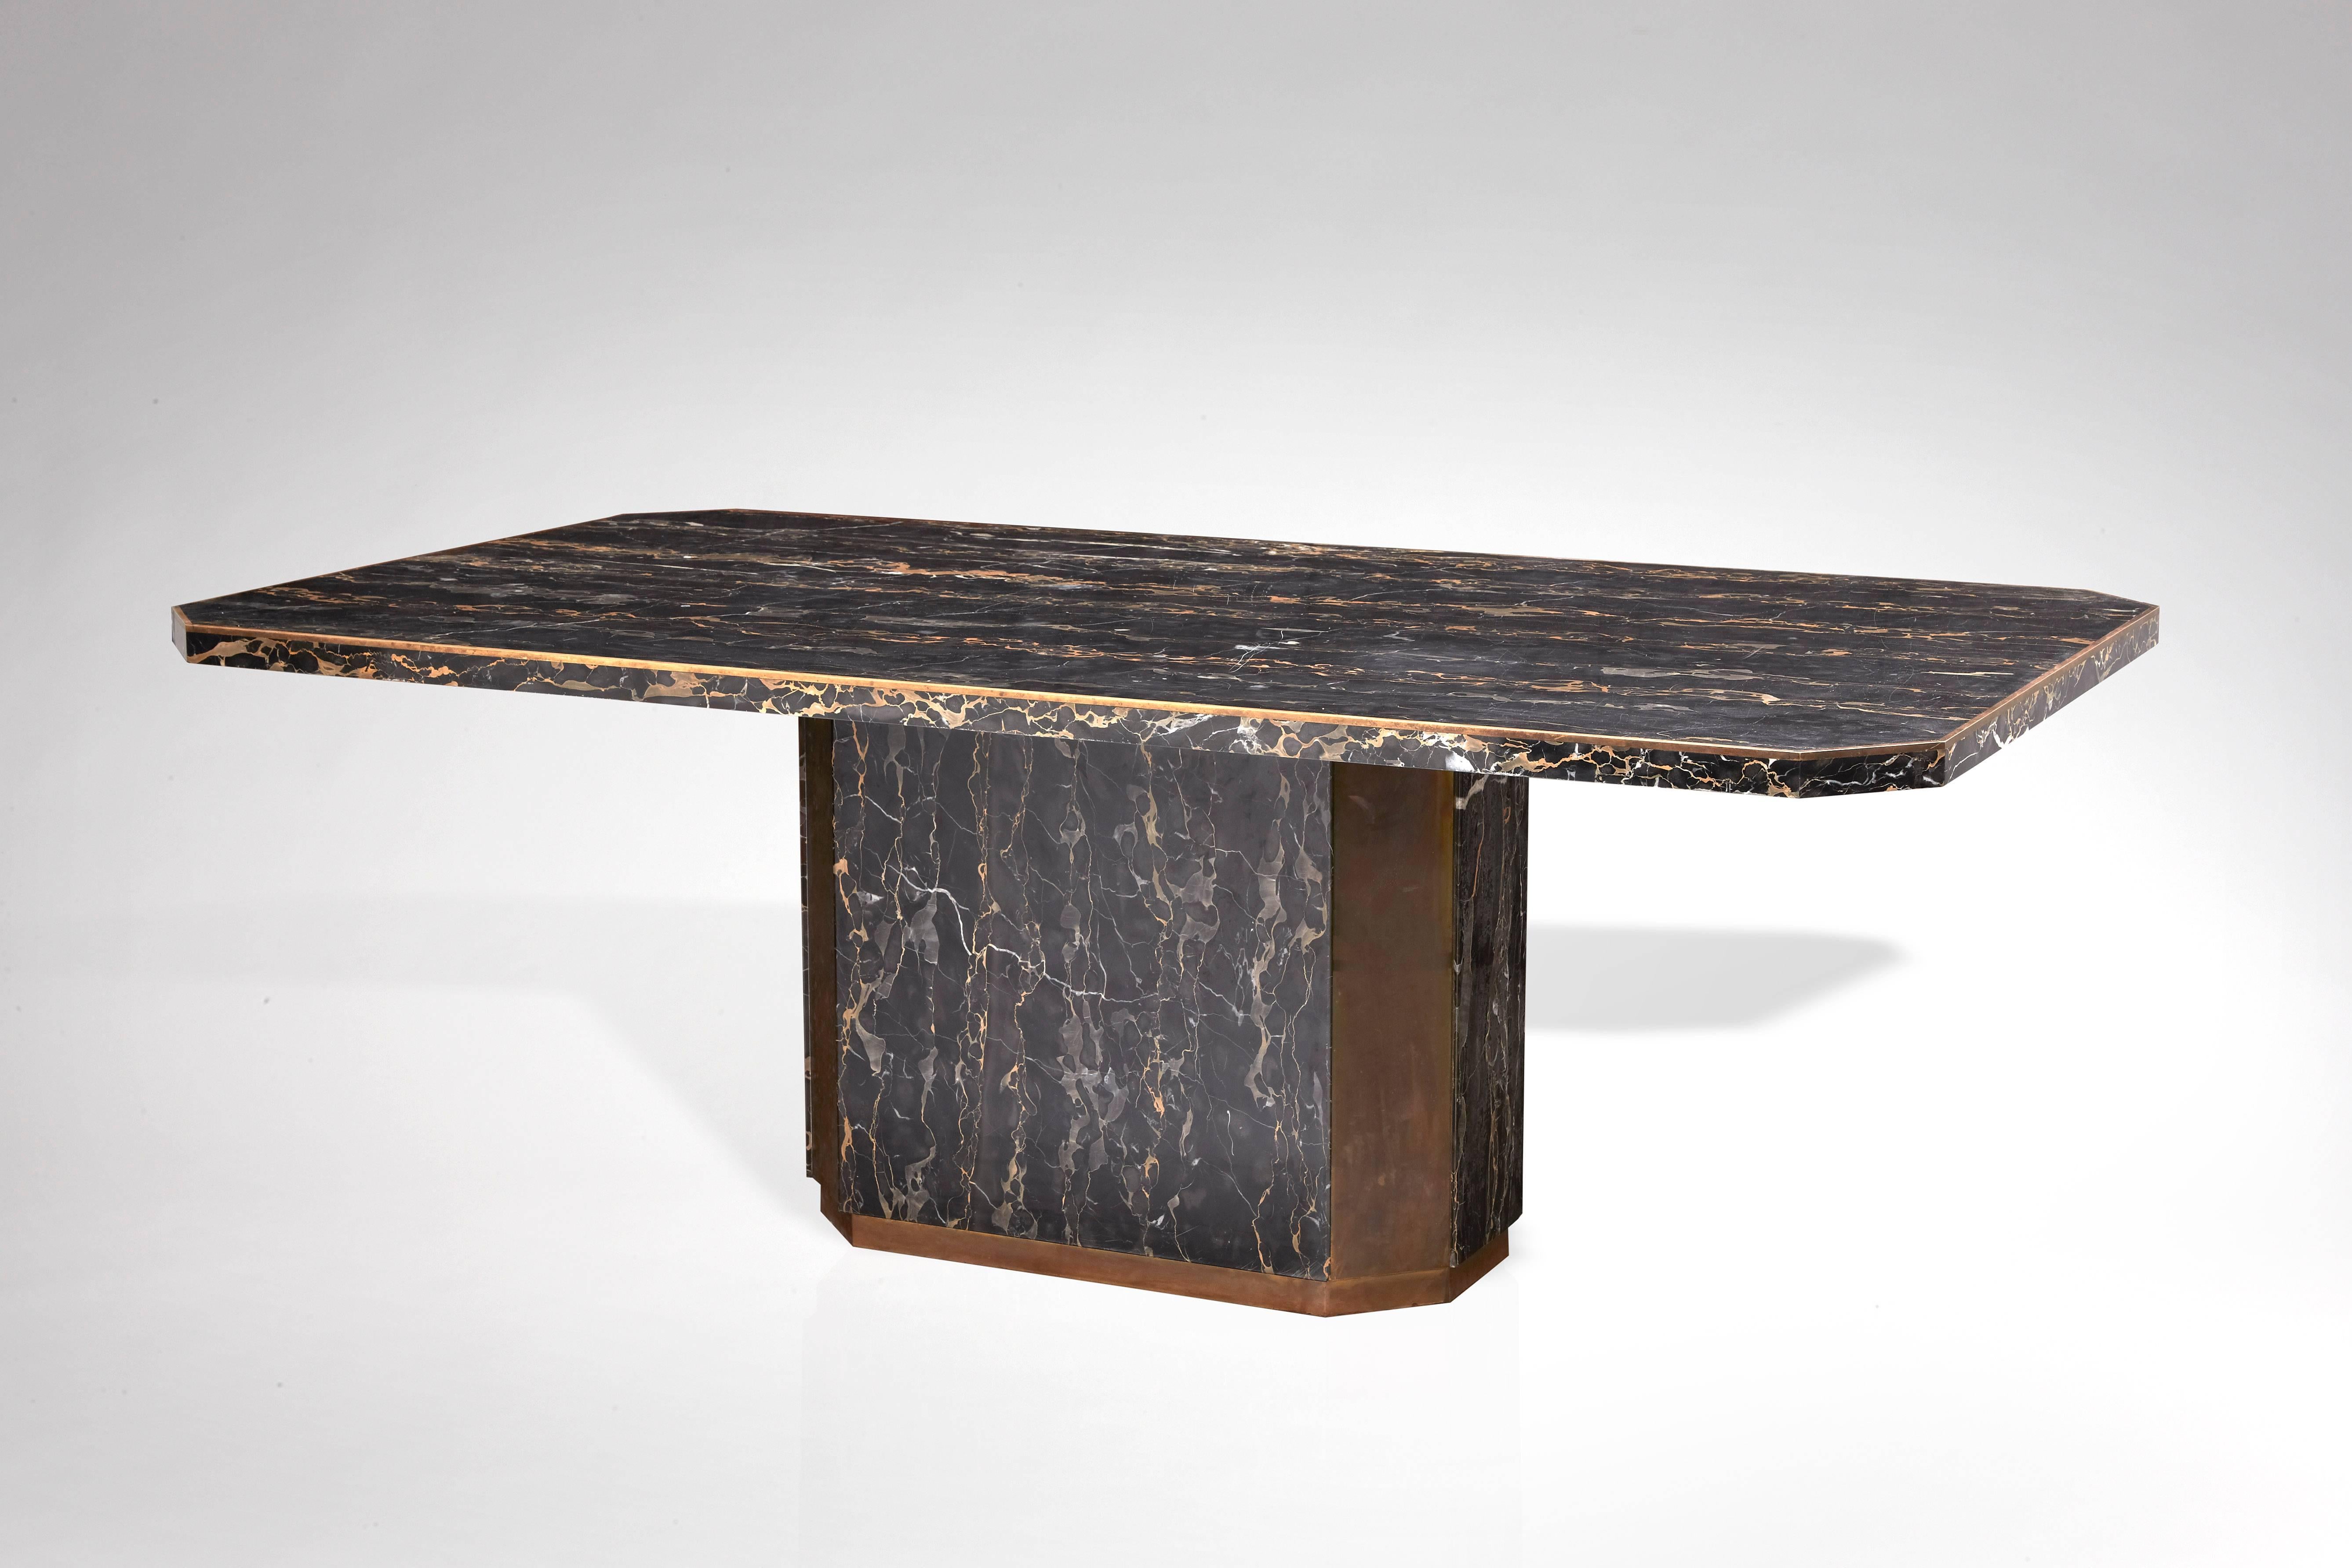 Dining-room table, circa 1940.
Dining-room in Portor marble. The plate circled with brass on a pedestal base covered with Portor marble with rounded edges and bronze plaques.
Weight : 350 Kg.

Origin
Hôtel particulier Art Déco à Monte Carlo.